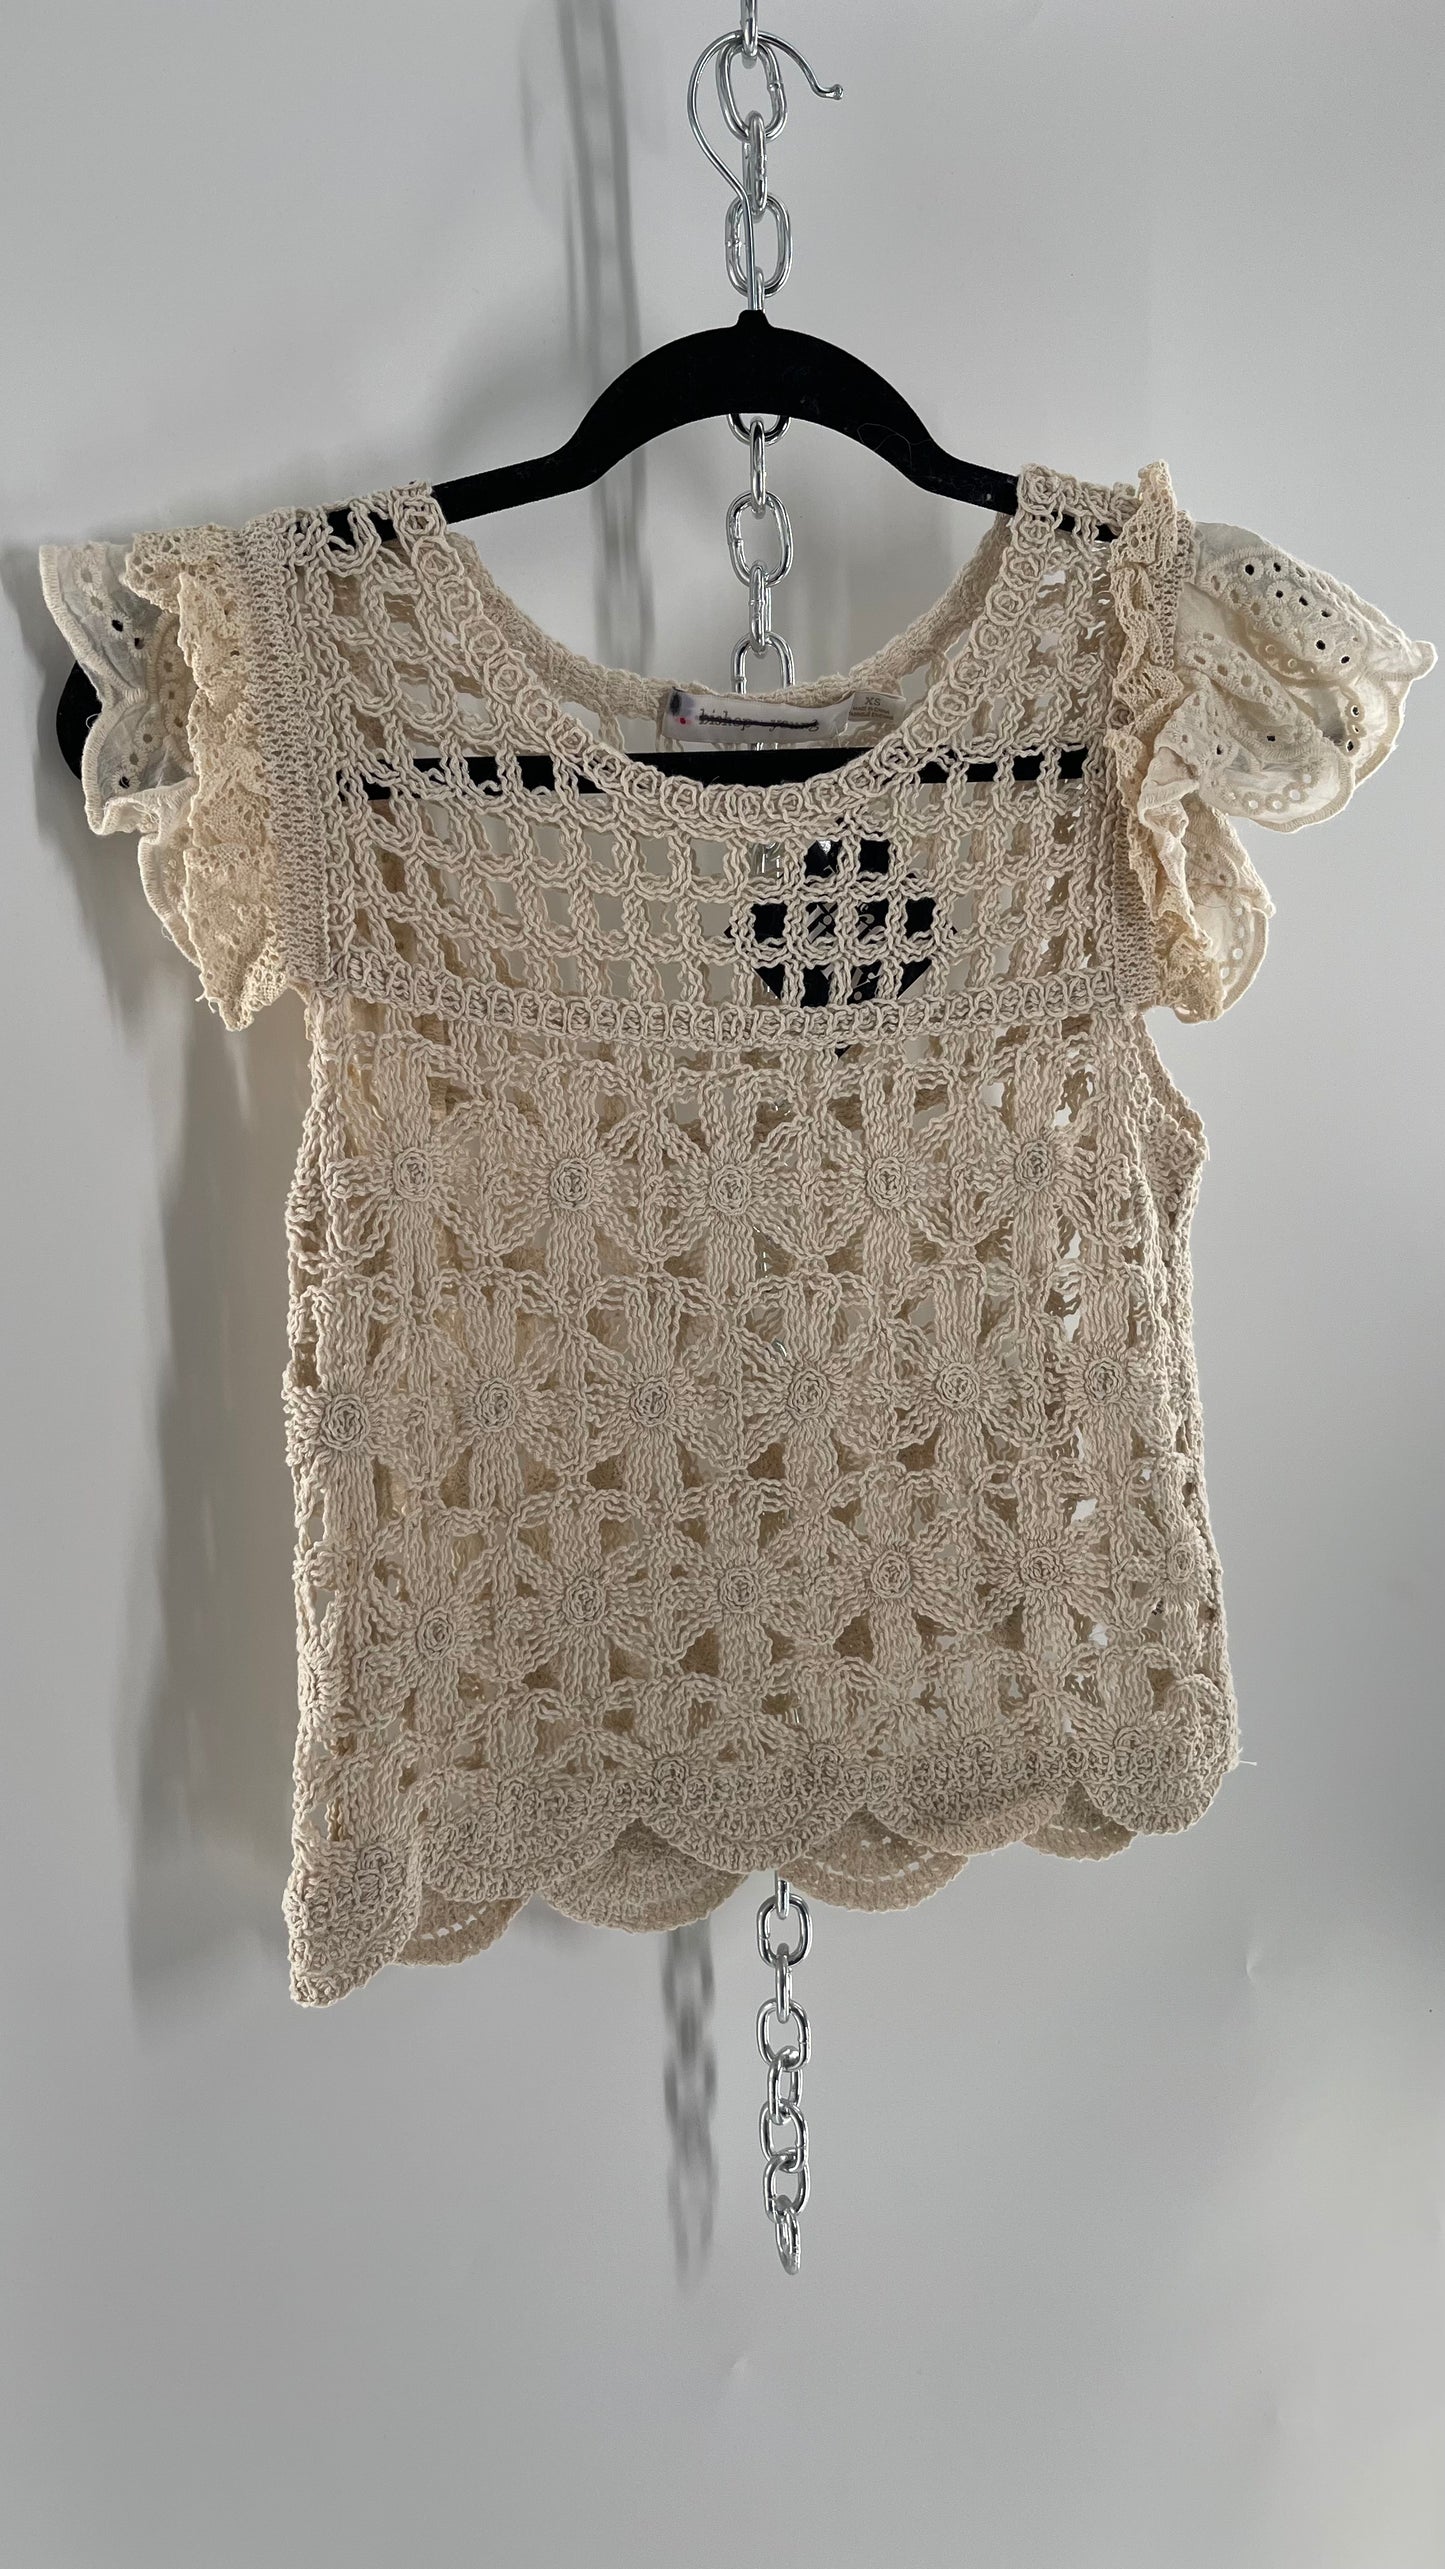 Bishop + Young Anthropologie Crochet Tank with Scalloped Hem and Lace Lined Sleeves (Medium)